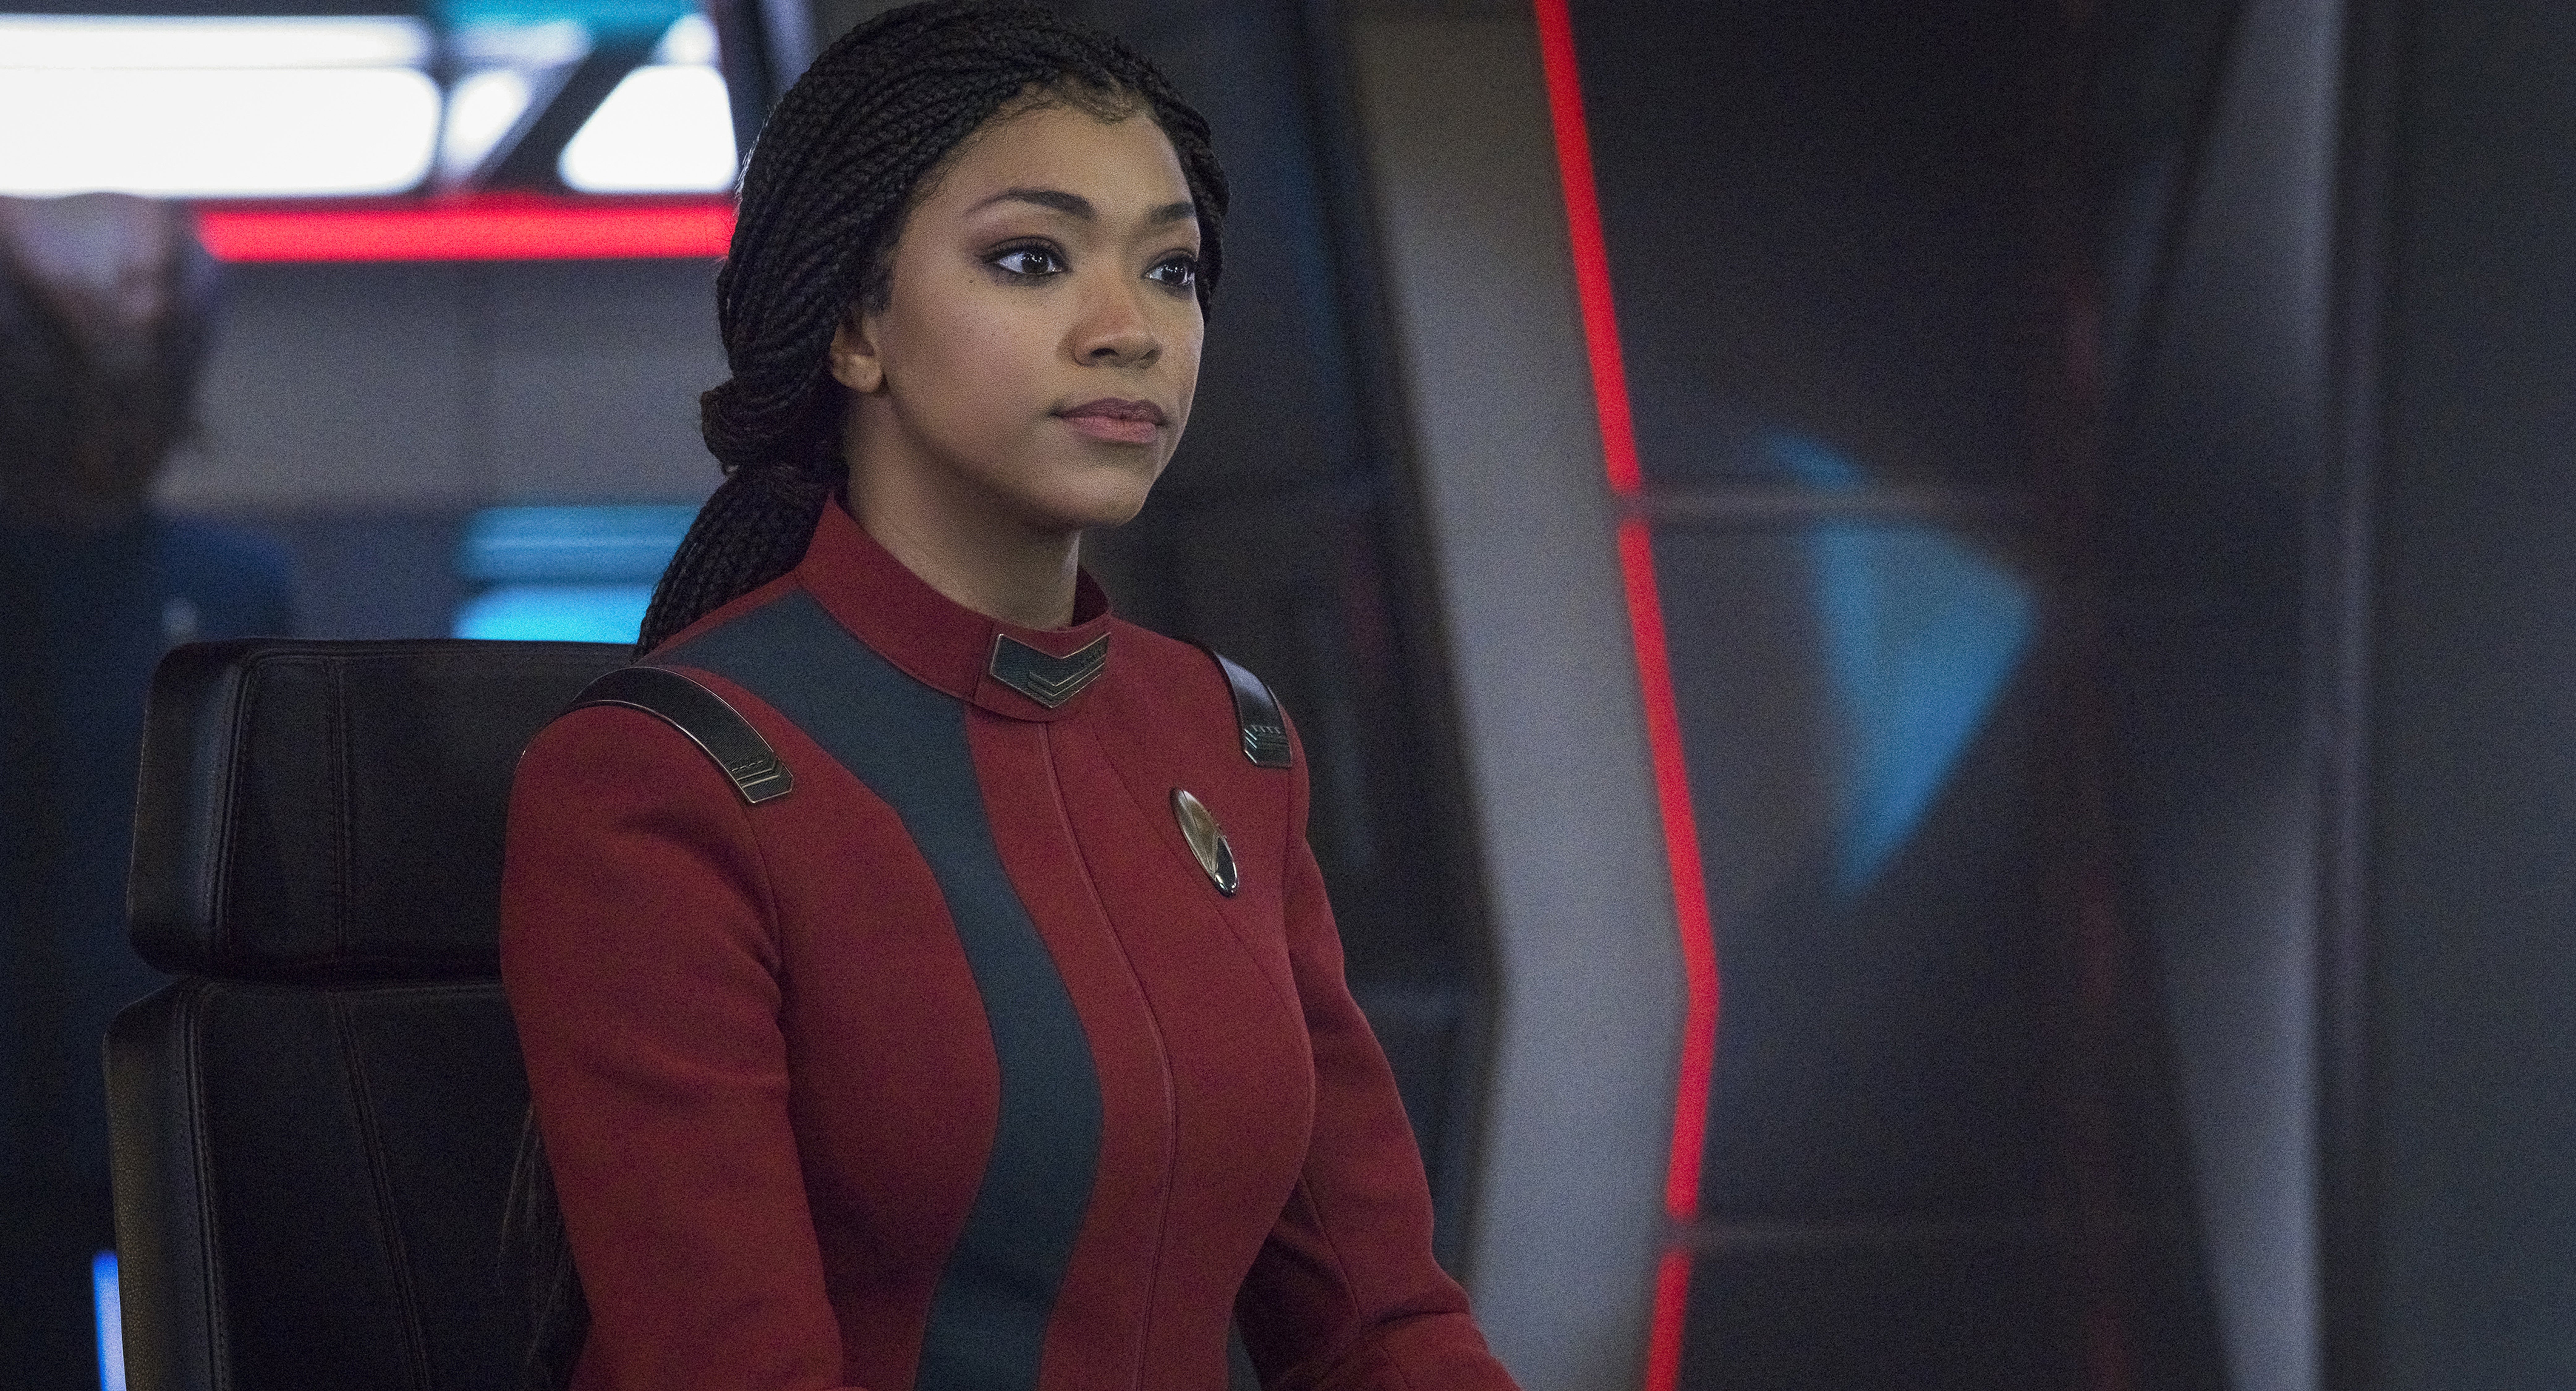 EXCLUSIVE | Star Trek: Discovery's Sonequa Martin-Green on Her Role and  Impact as a Black Captain